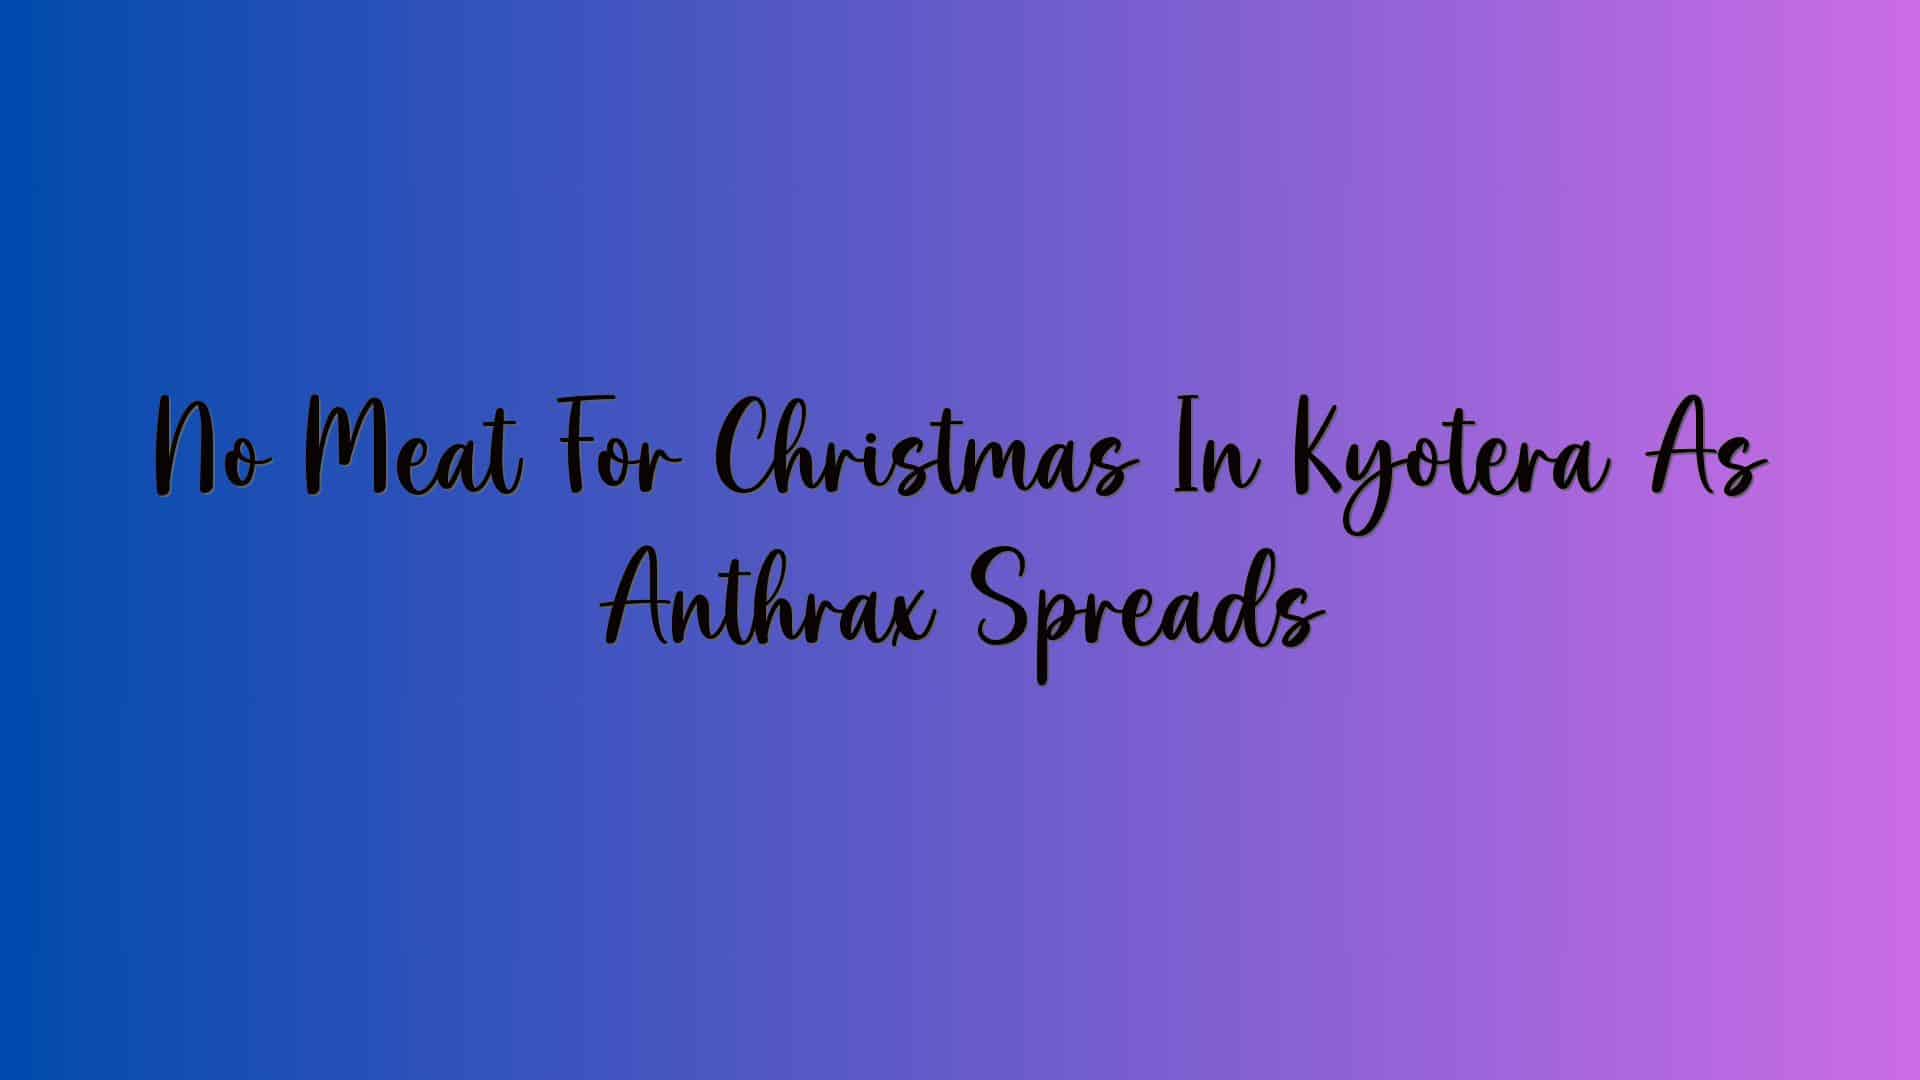 No Meat For Christmas In Kyotera As Anthrax Spreads